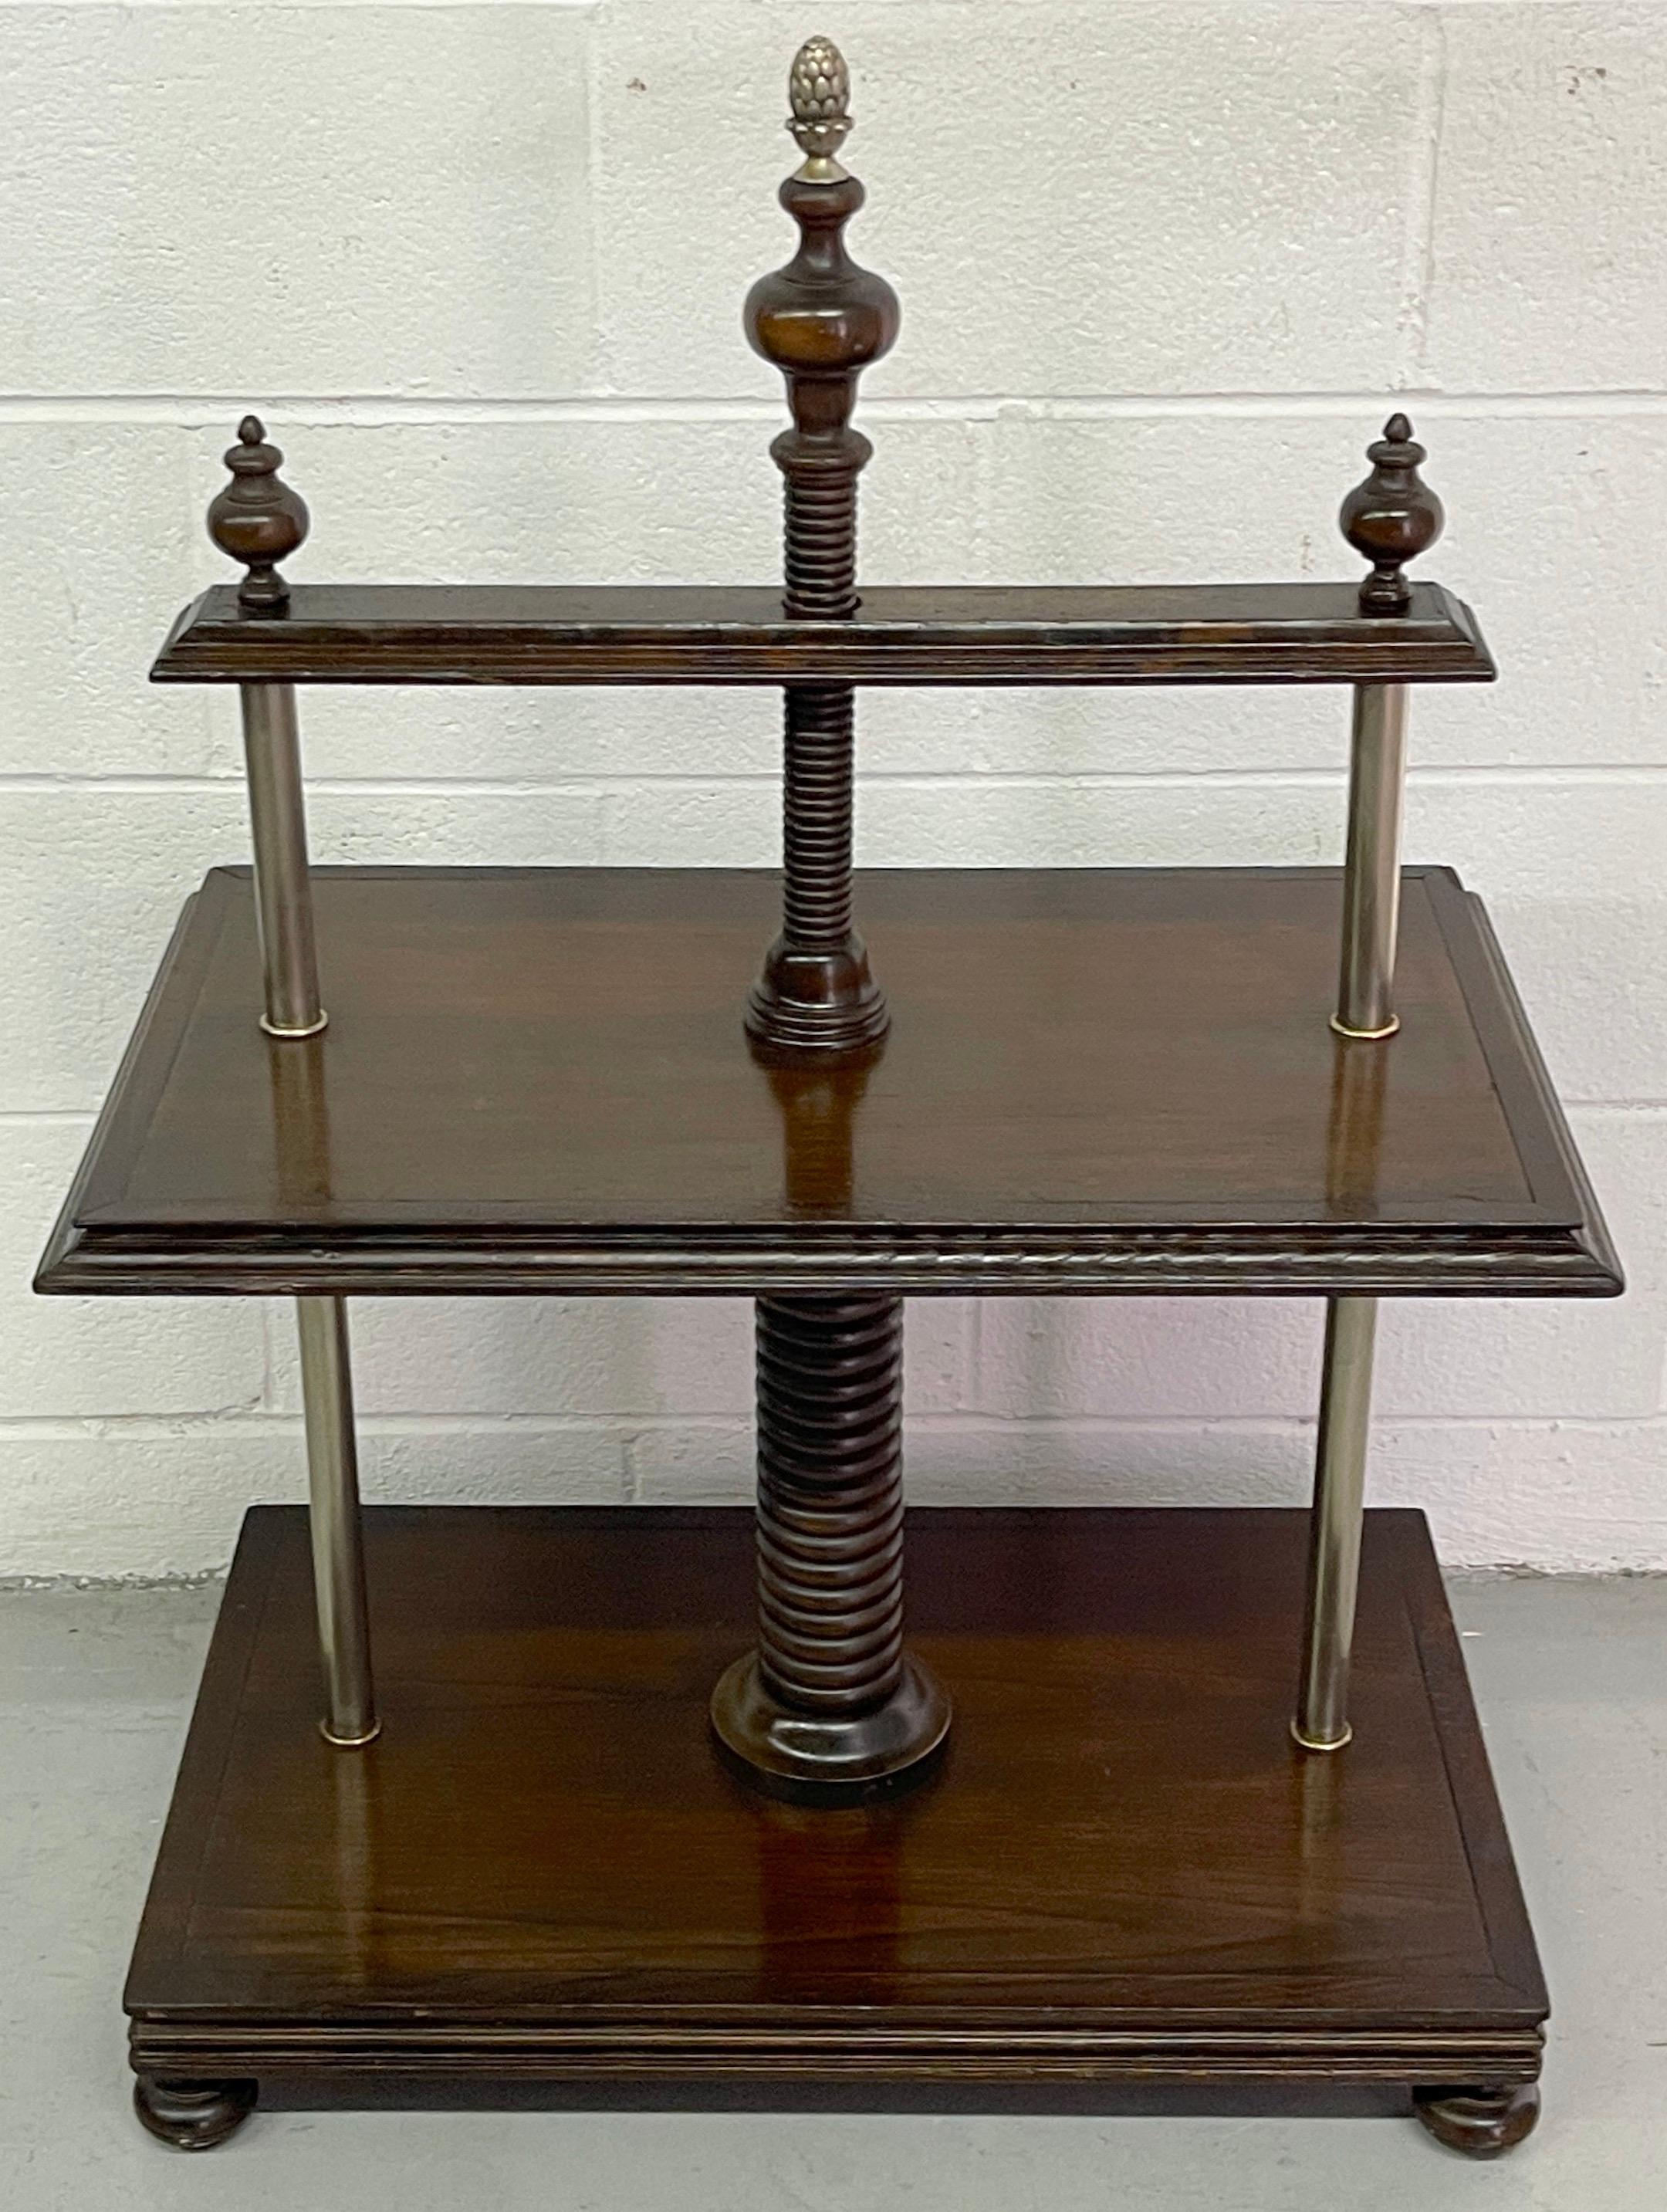 Model of a European bookpress end/side table 
Europe, 20th Century 
A model of a European book binding press made of hardwood with turned wood faux clamps, with silverplated bronze acorn finial at the top. This is a non-functional bookpress, this